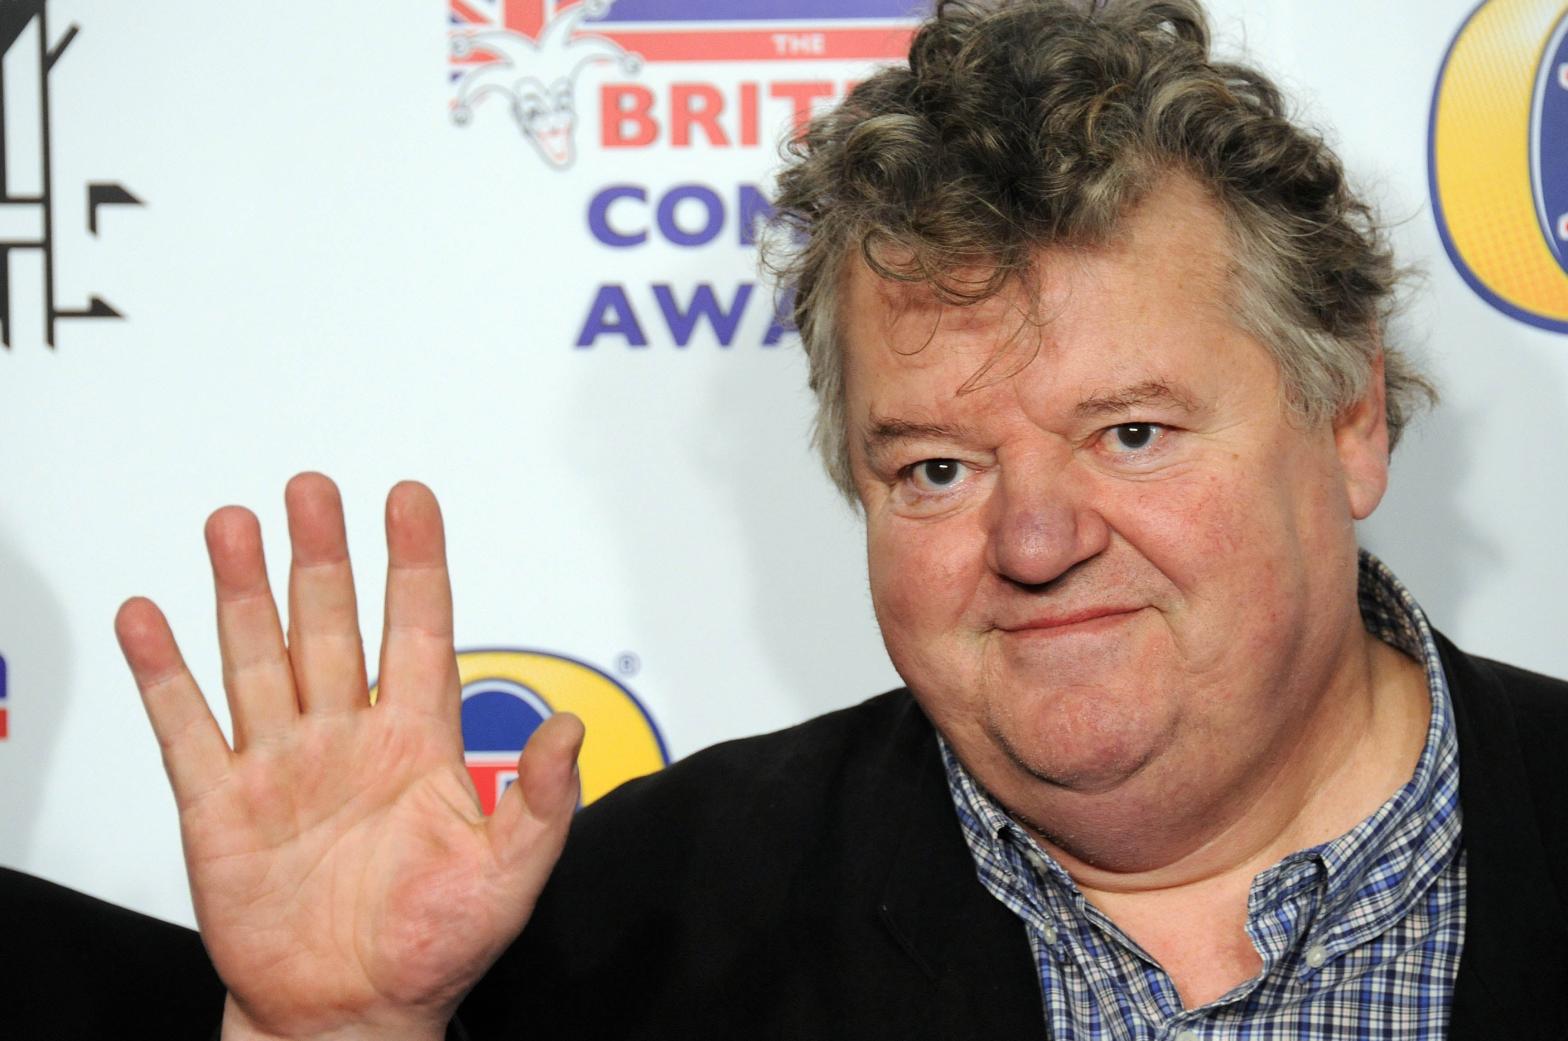 Robbie Coltrane at the 2011 British Comedy Awards. (Photo: Stuart Wilson, Getty Images)